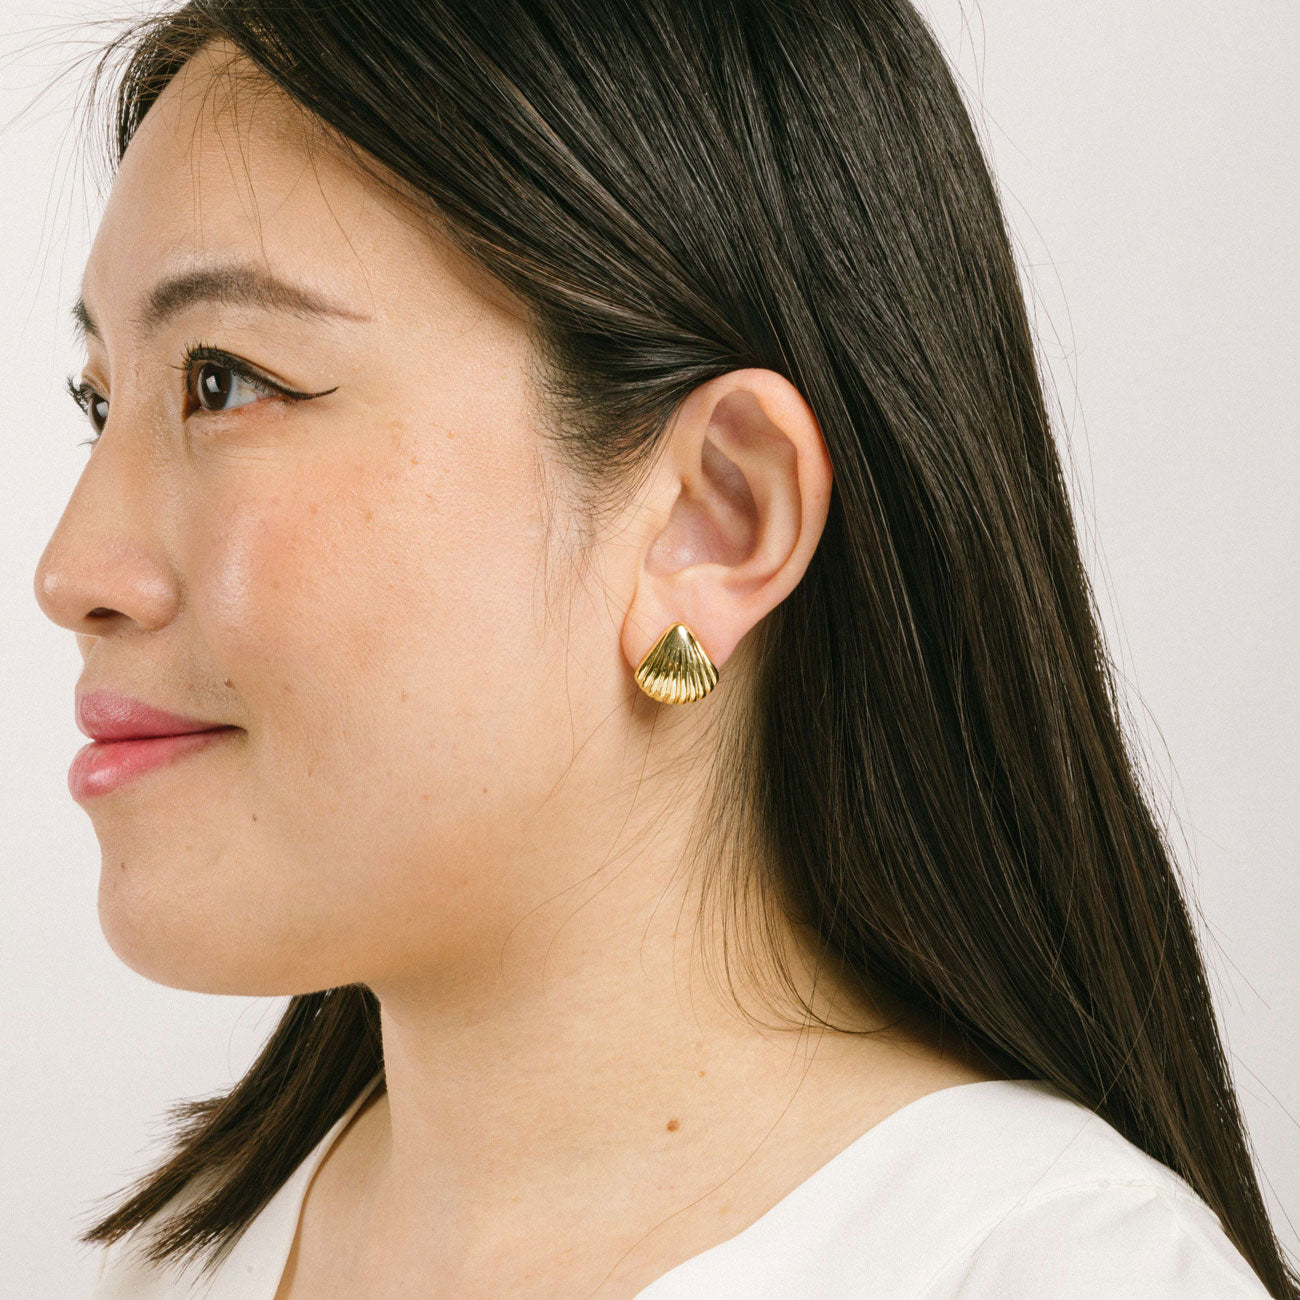 A model wearing the Mer Clip On earrings feature an easy-to-use mosquito coil clip-on closure, designed for all ear types including thick/large ears, sensitive ears, small/thin ears, and stretched/healing ears. Enjoy a comfortable wear duration lasting up to 24 hours with a medium secure hold. Easily adjust the padding forward once it’s on the ear. Crafted with gold-toned copper alloy, each package contains one pair.